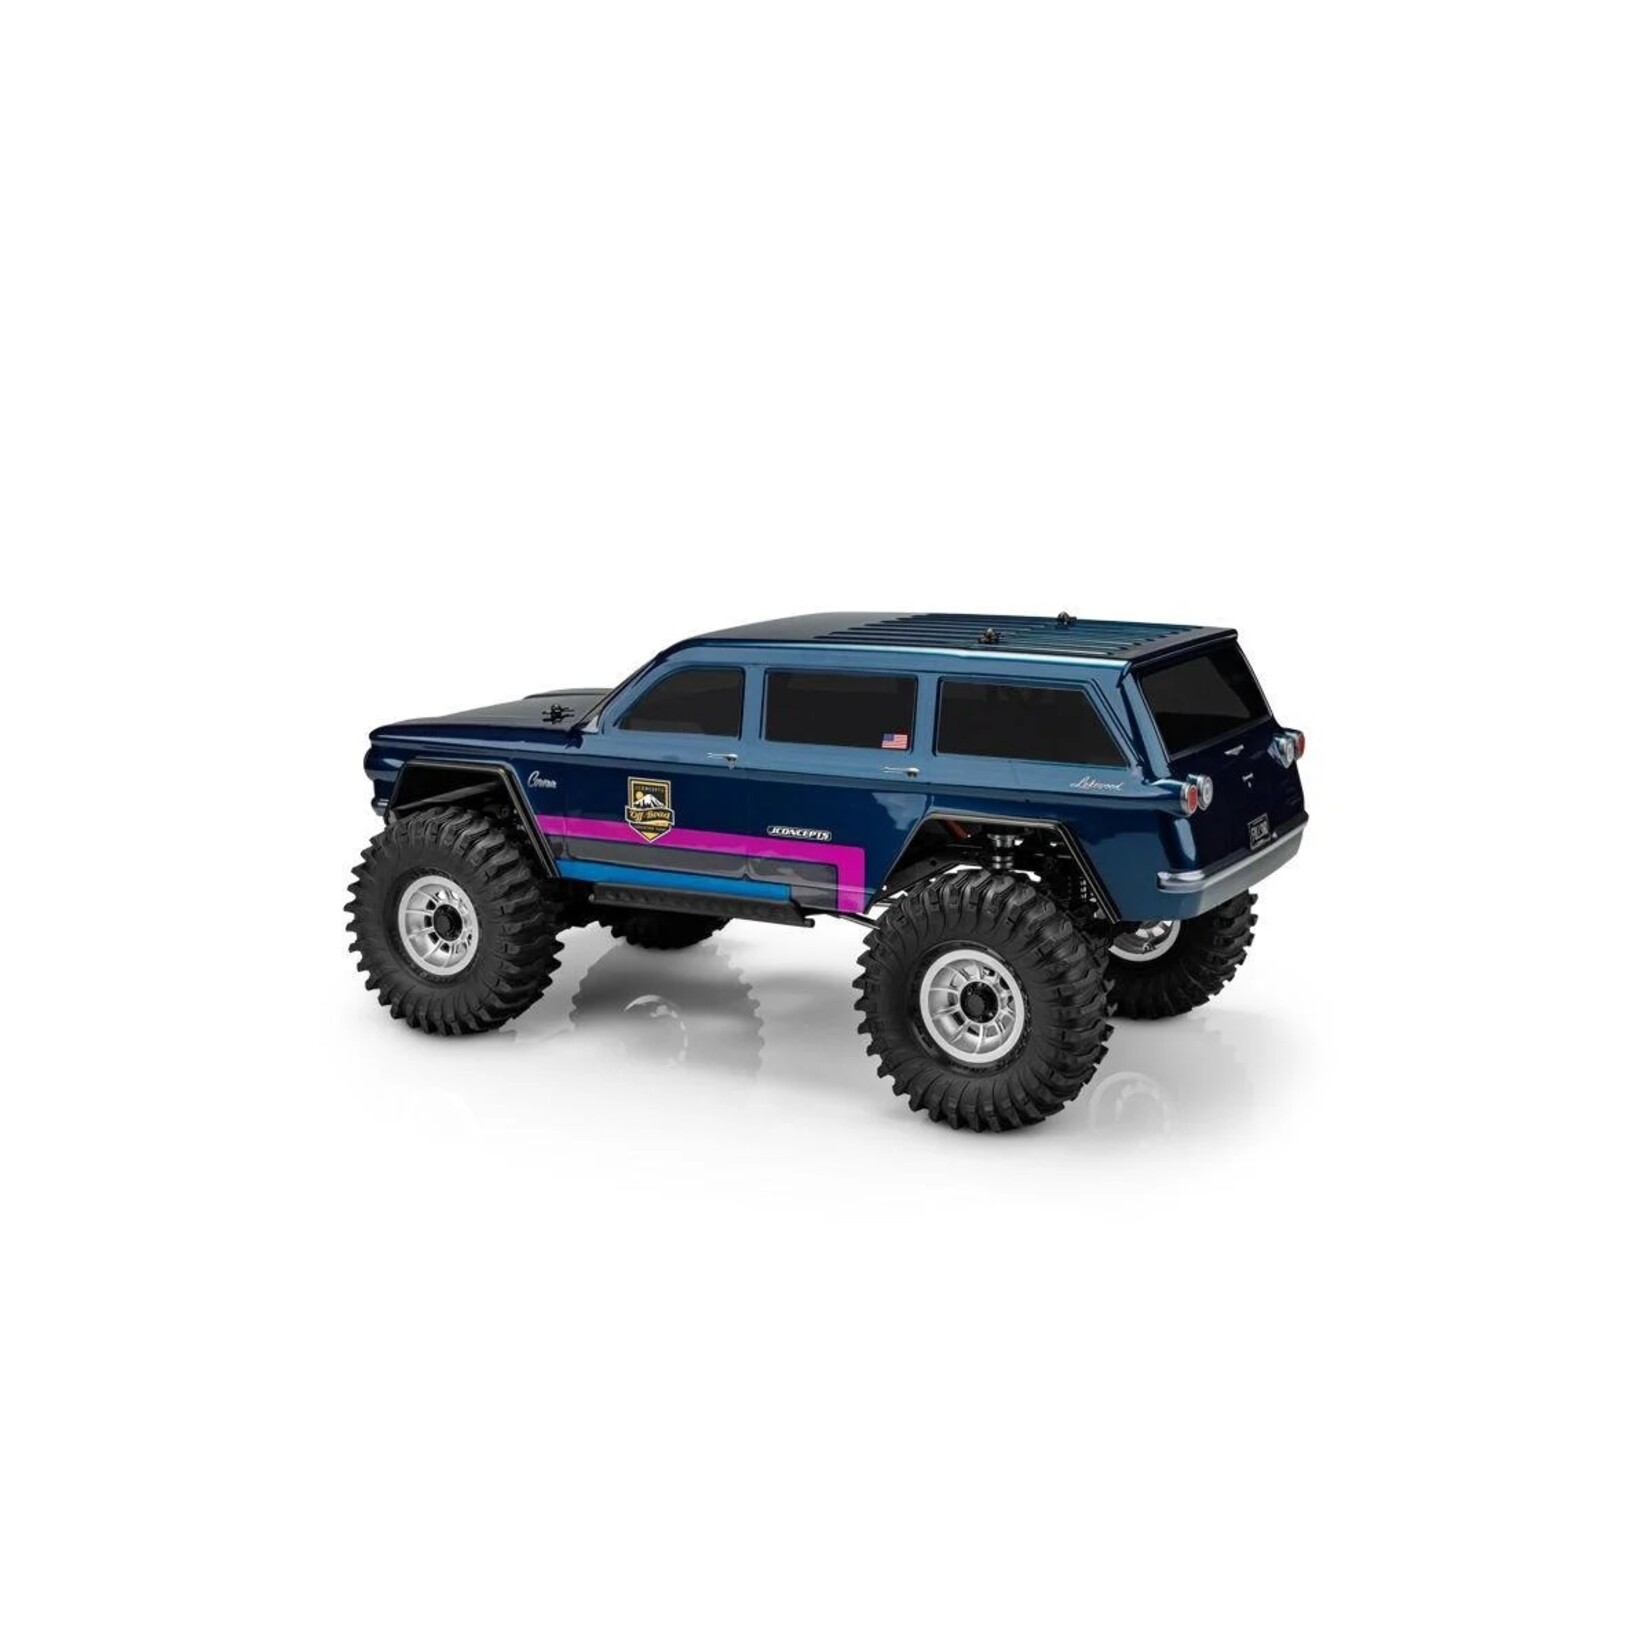 JConcepts JConcepts 1961 Corvair Lakewood Rock Crawler "Pre-Trimmed" Body (Clear) (12.3") #0480